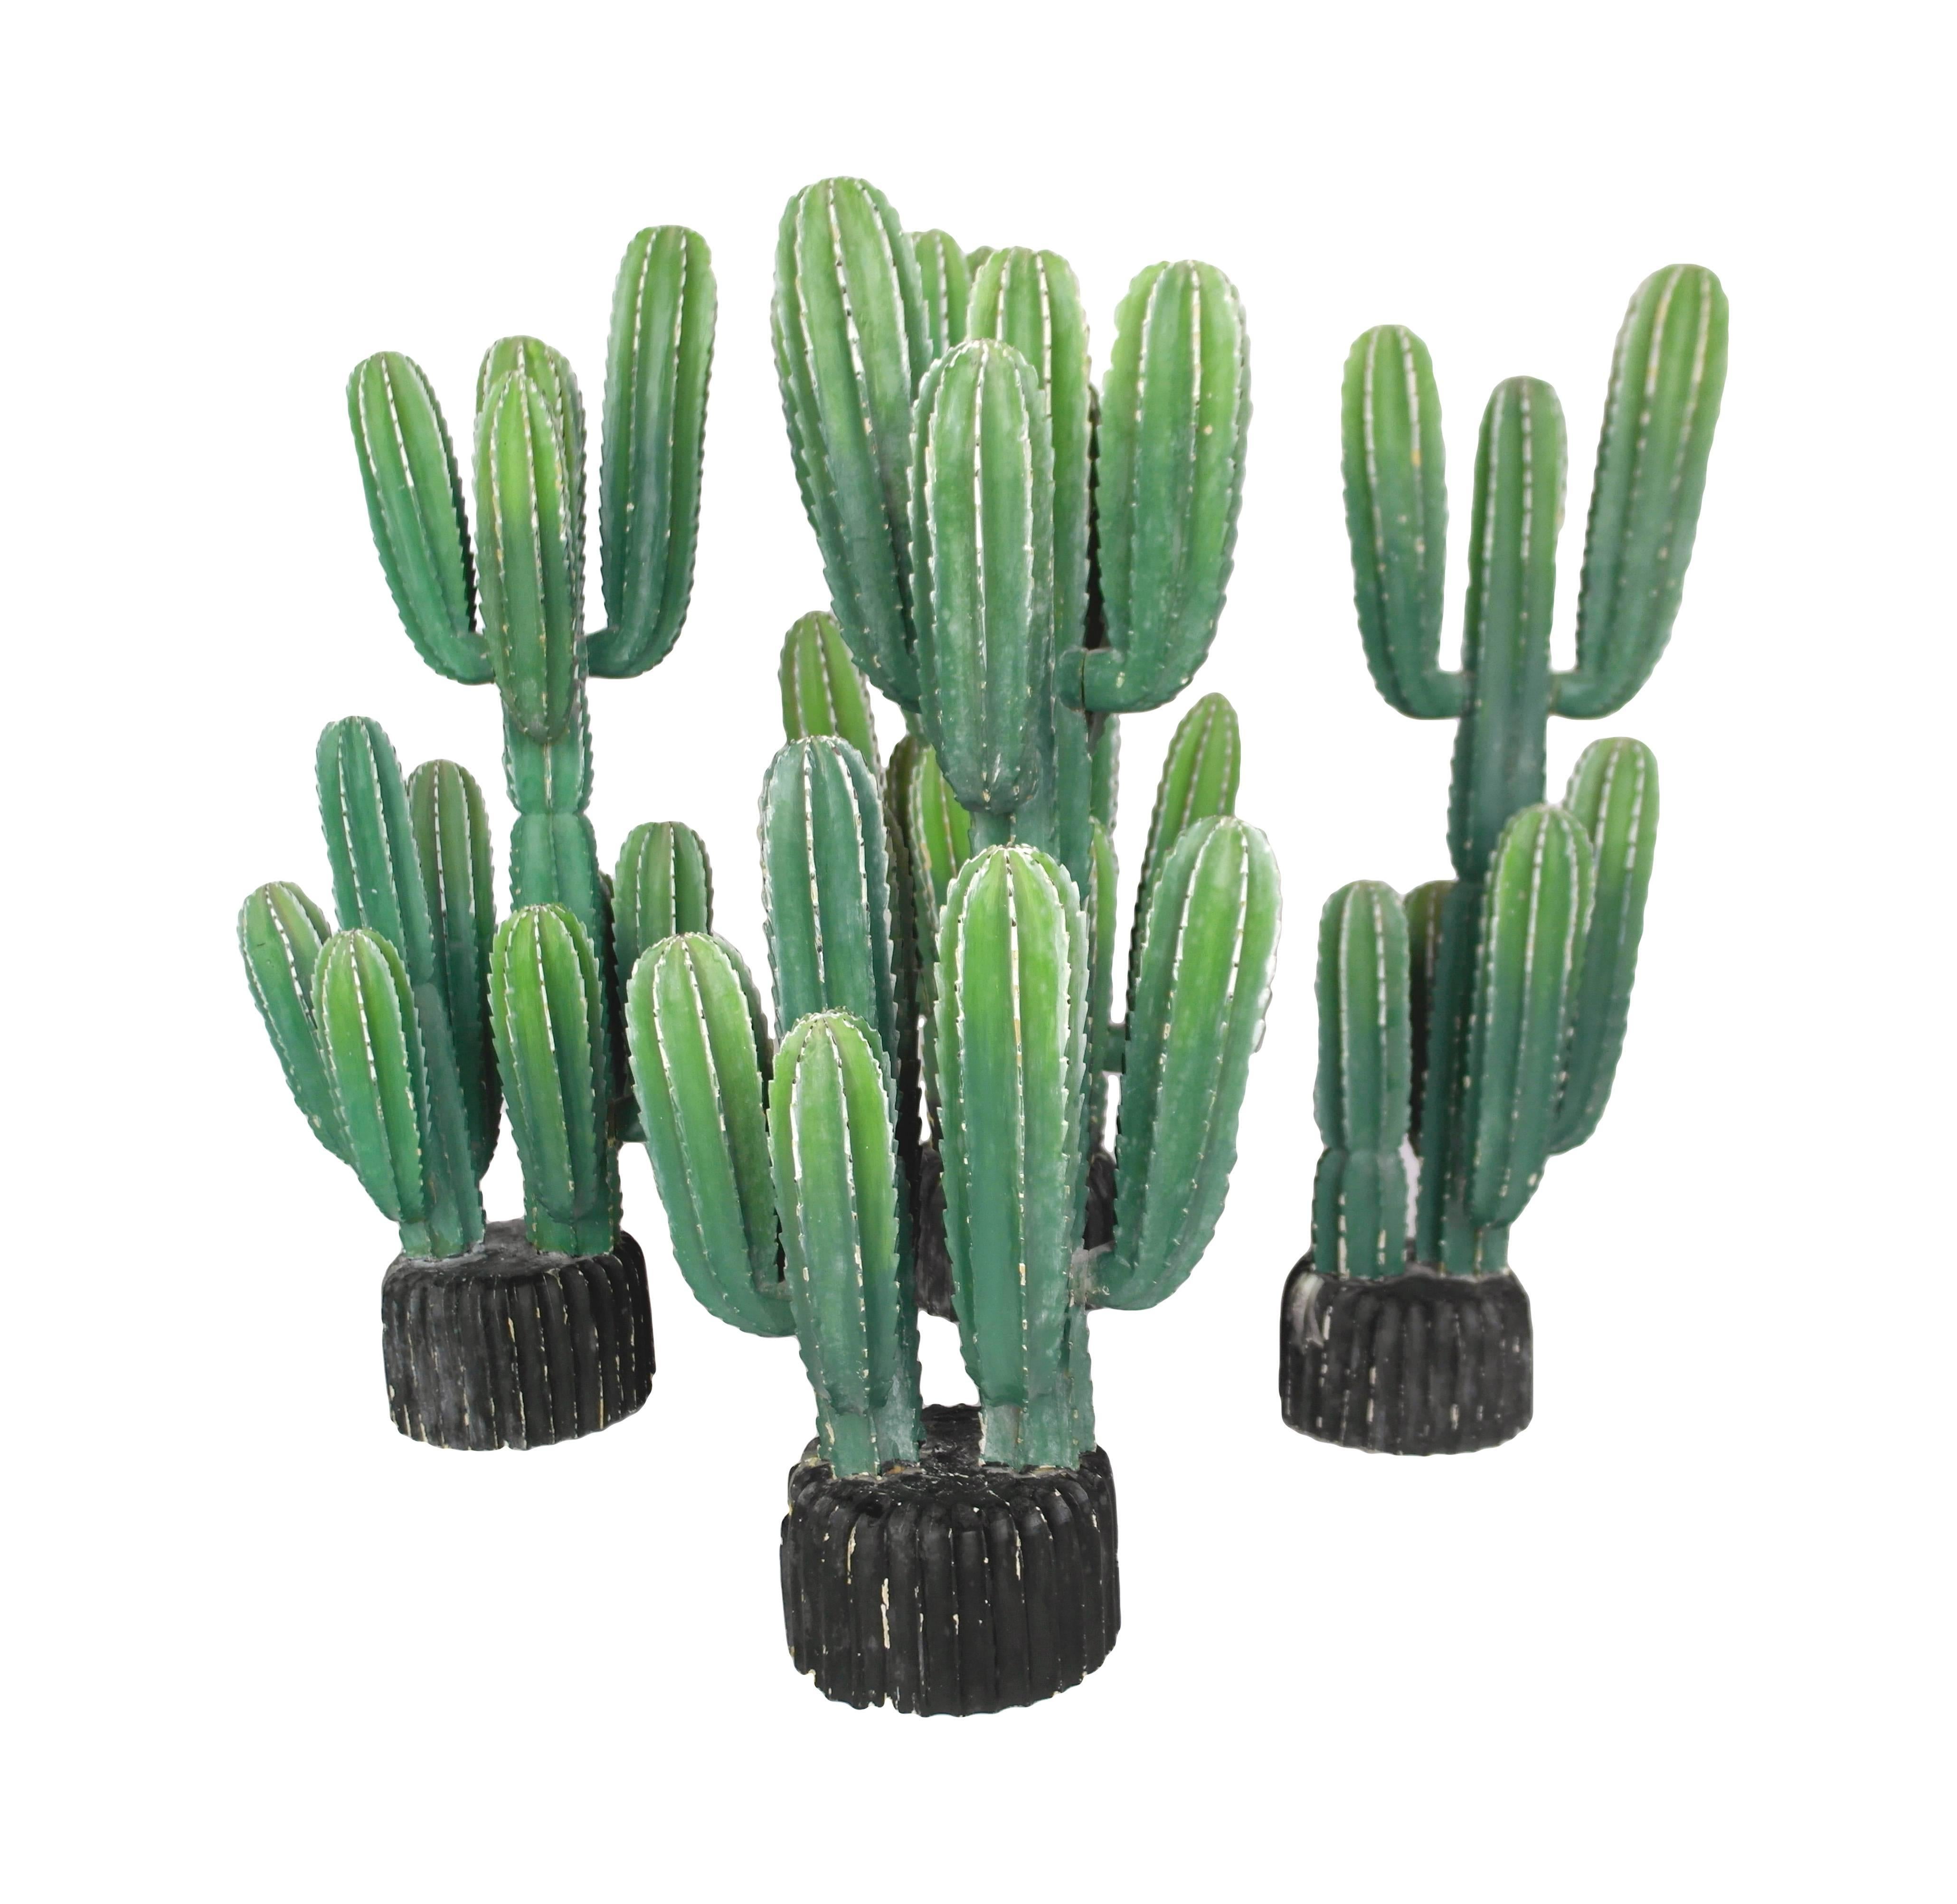 Huge Carved Cacti Painted Cactus Sculpture Set Rare and Unusual